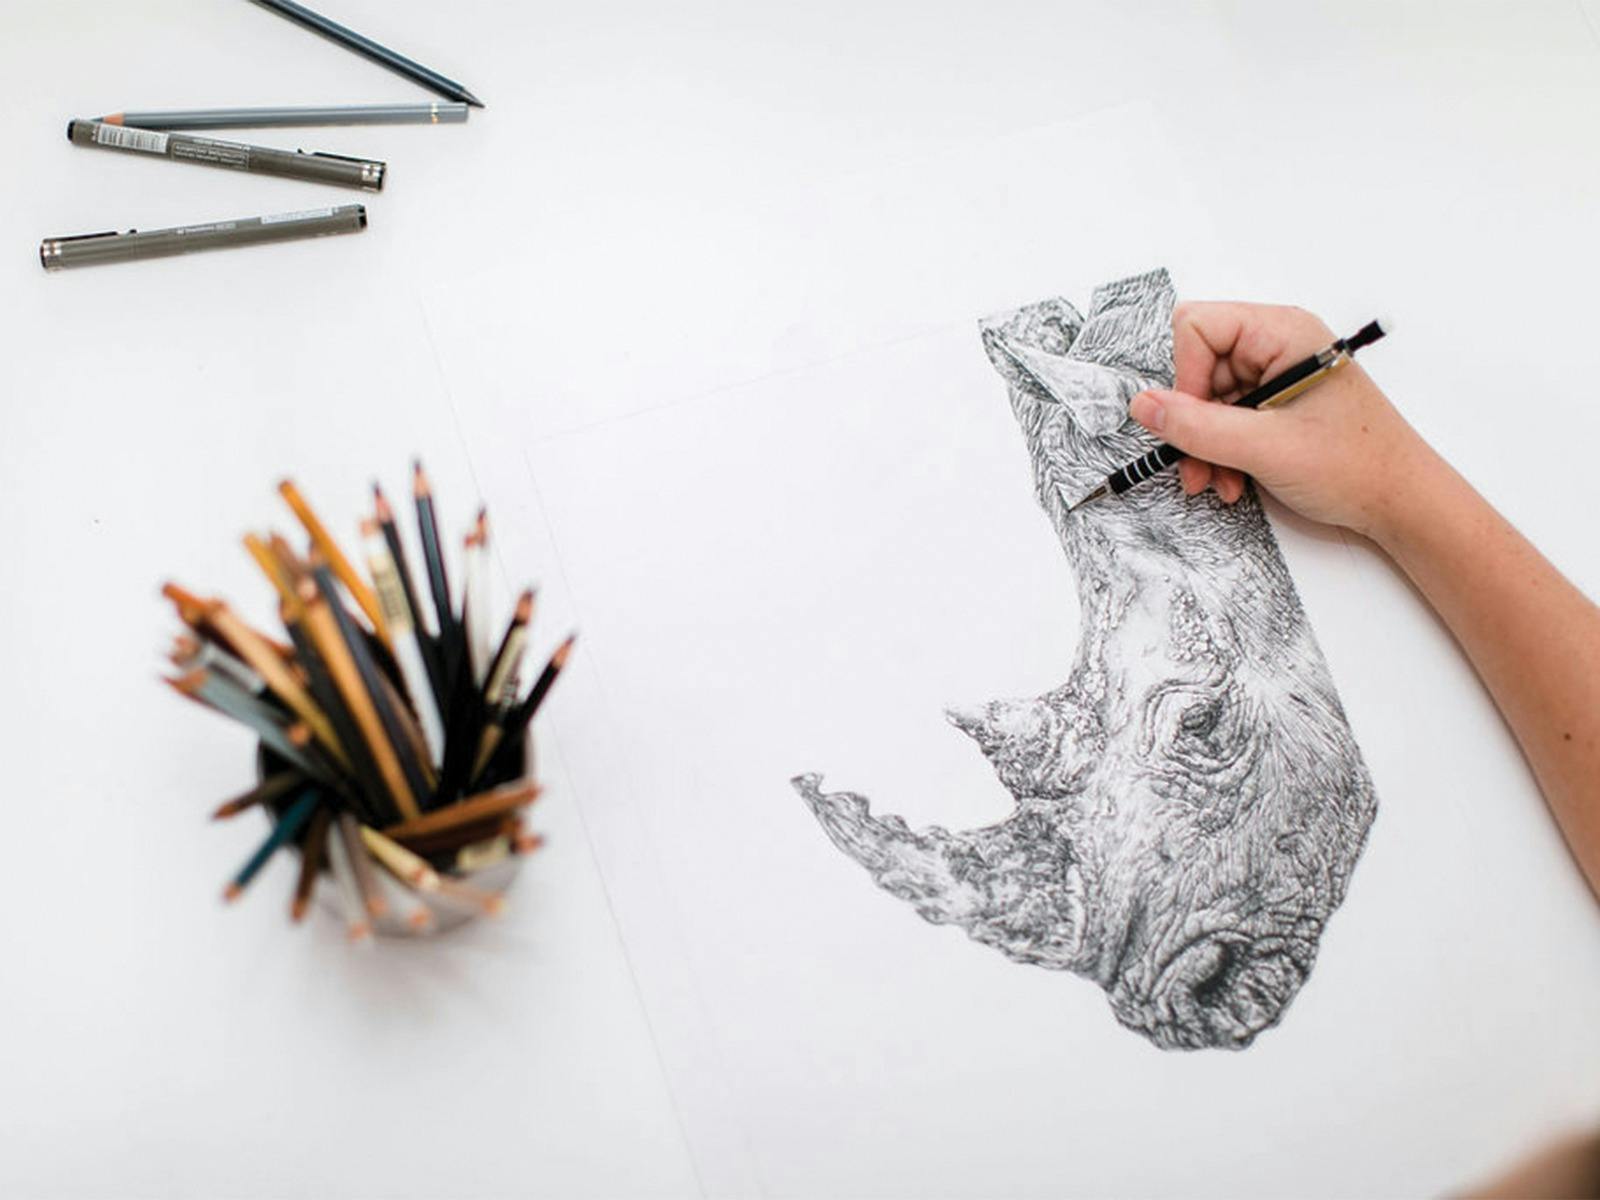 A hand holding a pencil, drawing a rhino. A cup of pencils on the left and pencils scattered around.